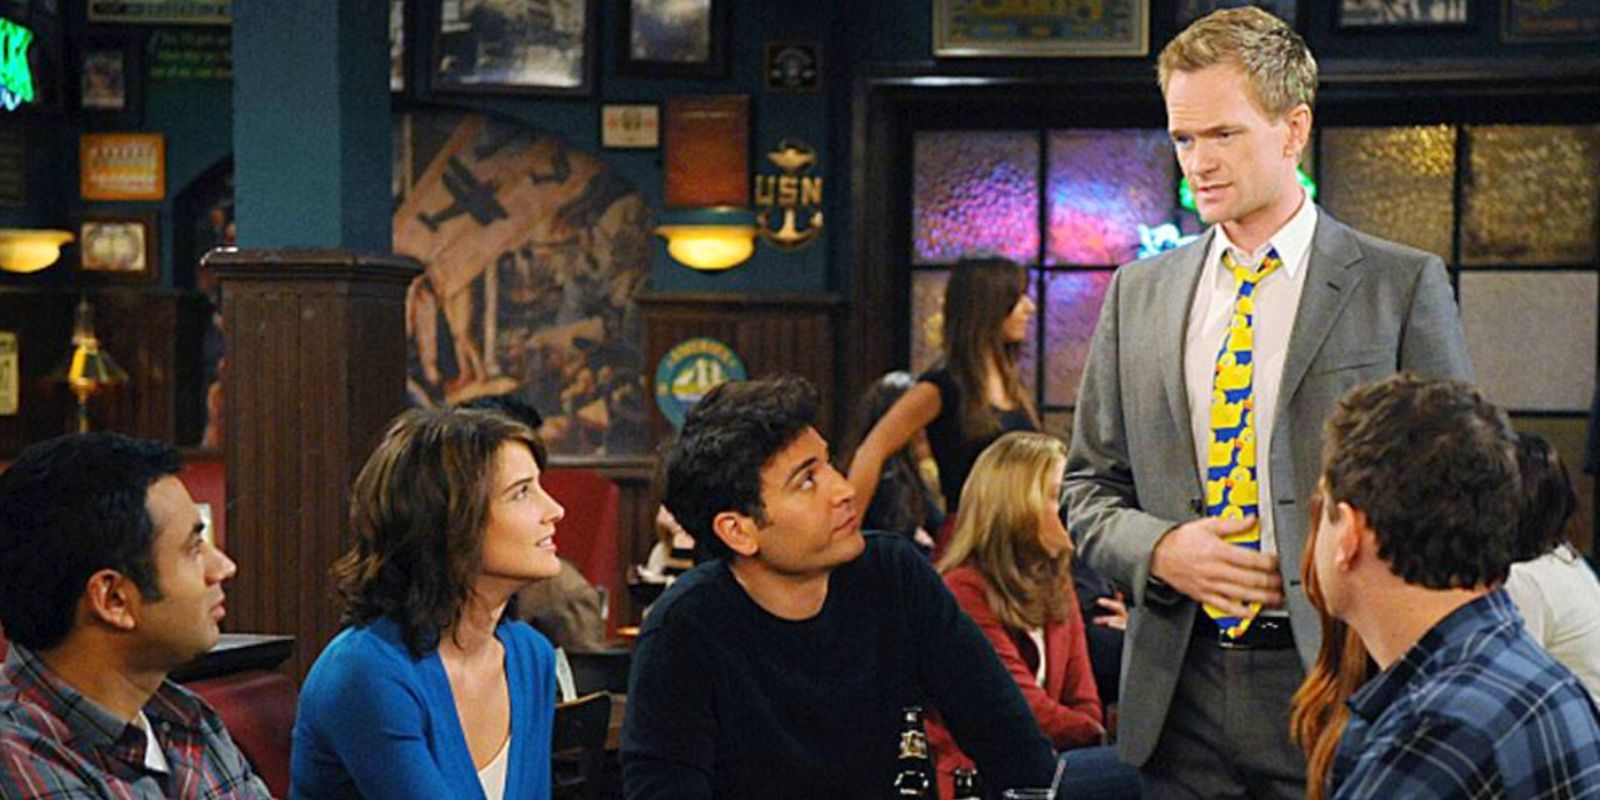 How I Met Your Mother: 5 Ways Barney Is An Overrated Character (& 5 Ways He’s Underrated)